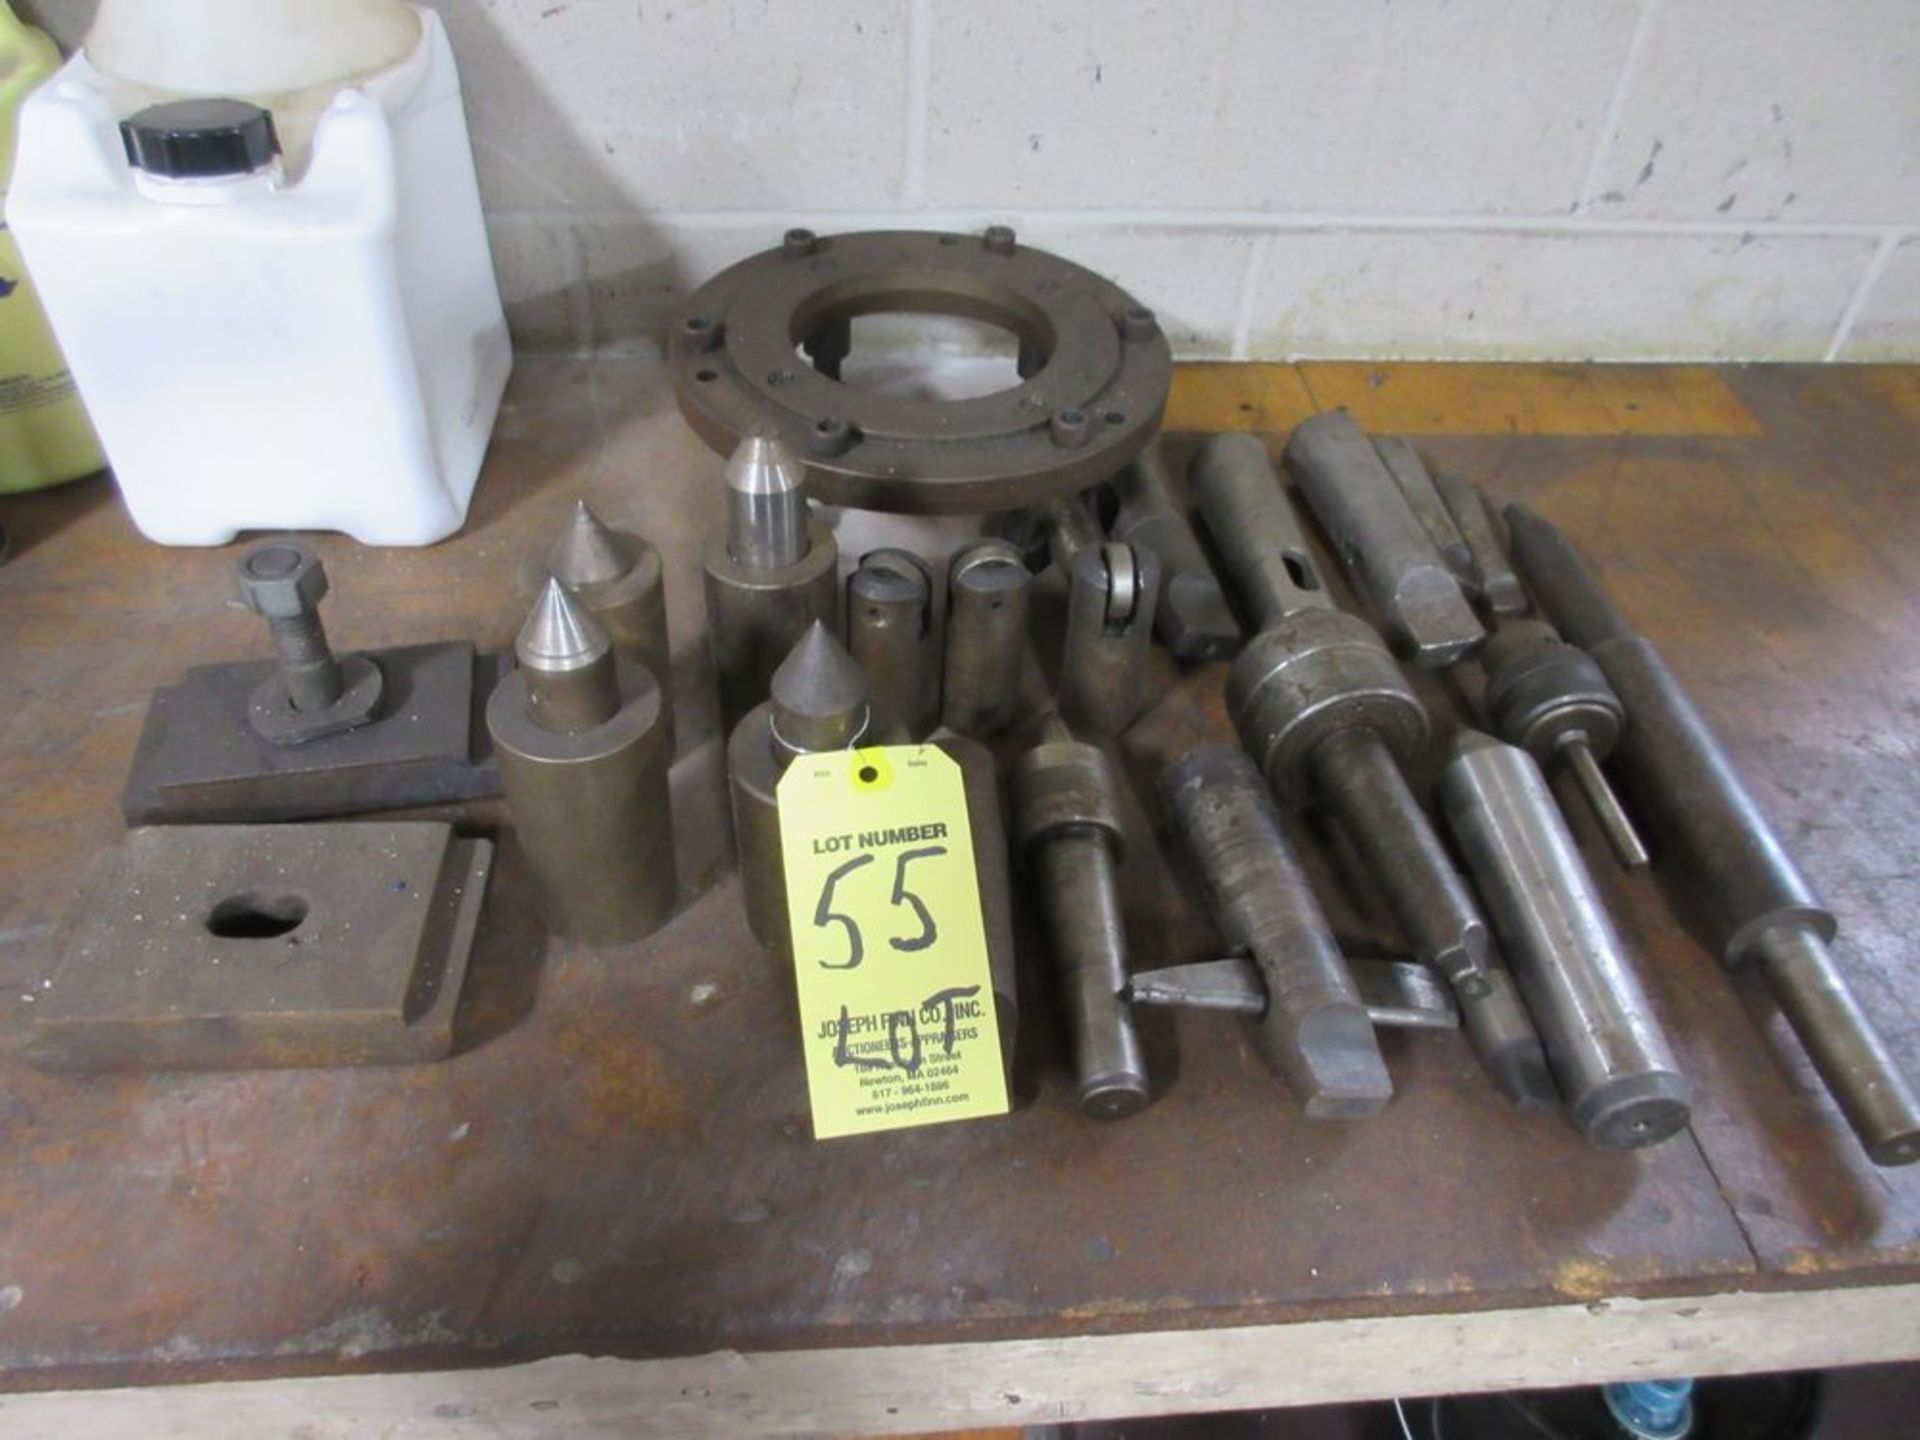 LOT Asst. Lathe Tooling Including Live Spindles, Chuck, Plate on Bench